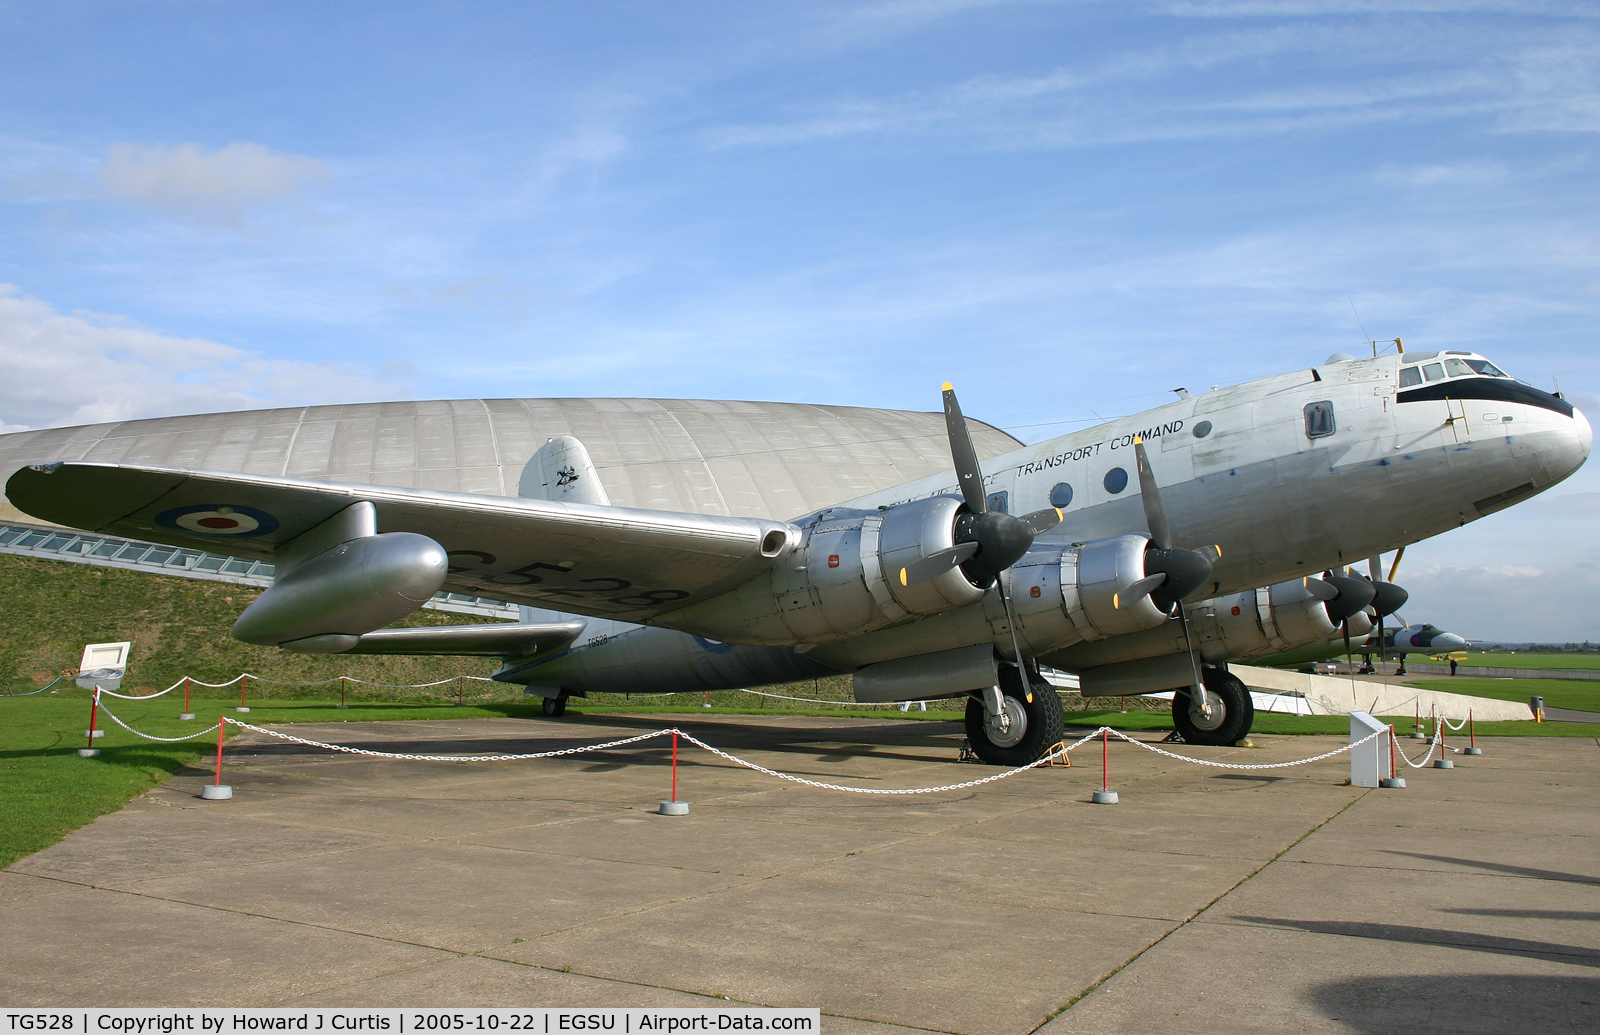 TG528, 1948 Handley Page Hastings C.1A C/N HP67/32, At the Imperial War Museum.